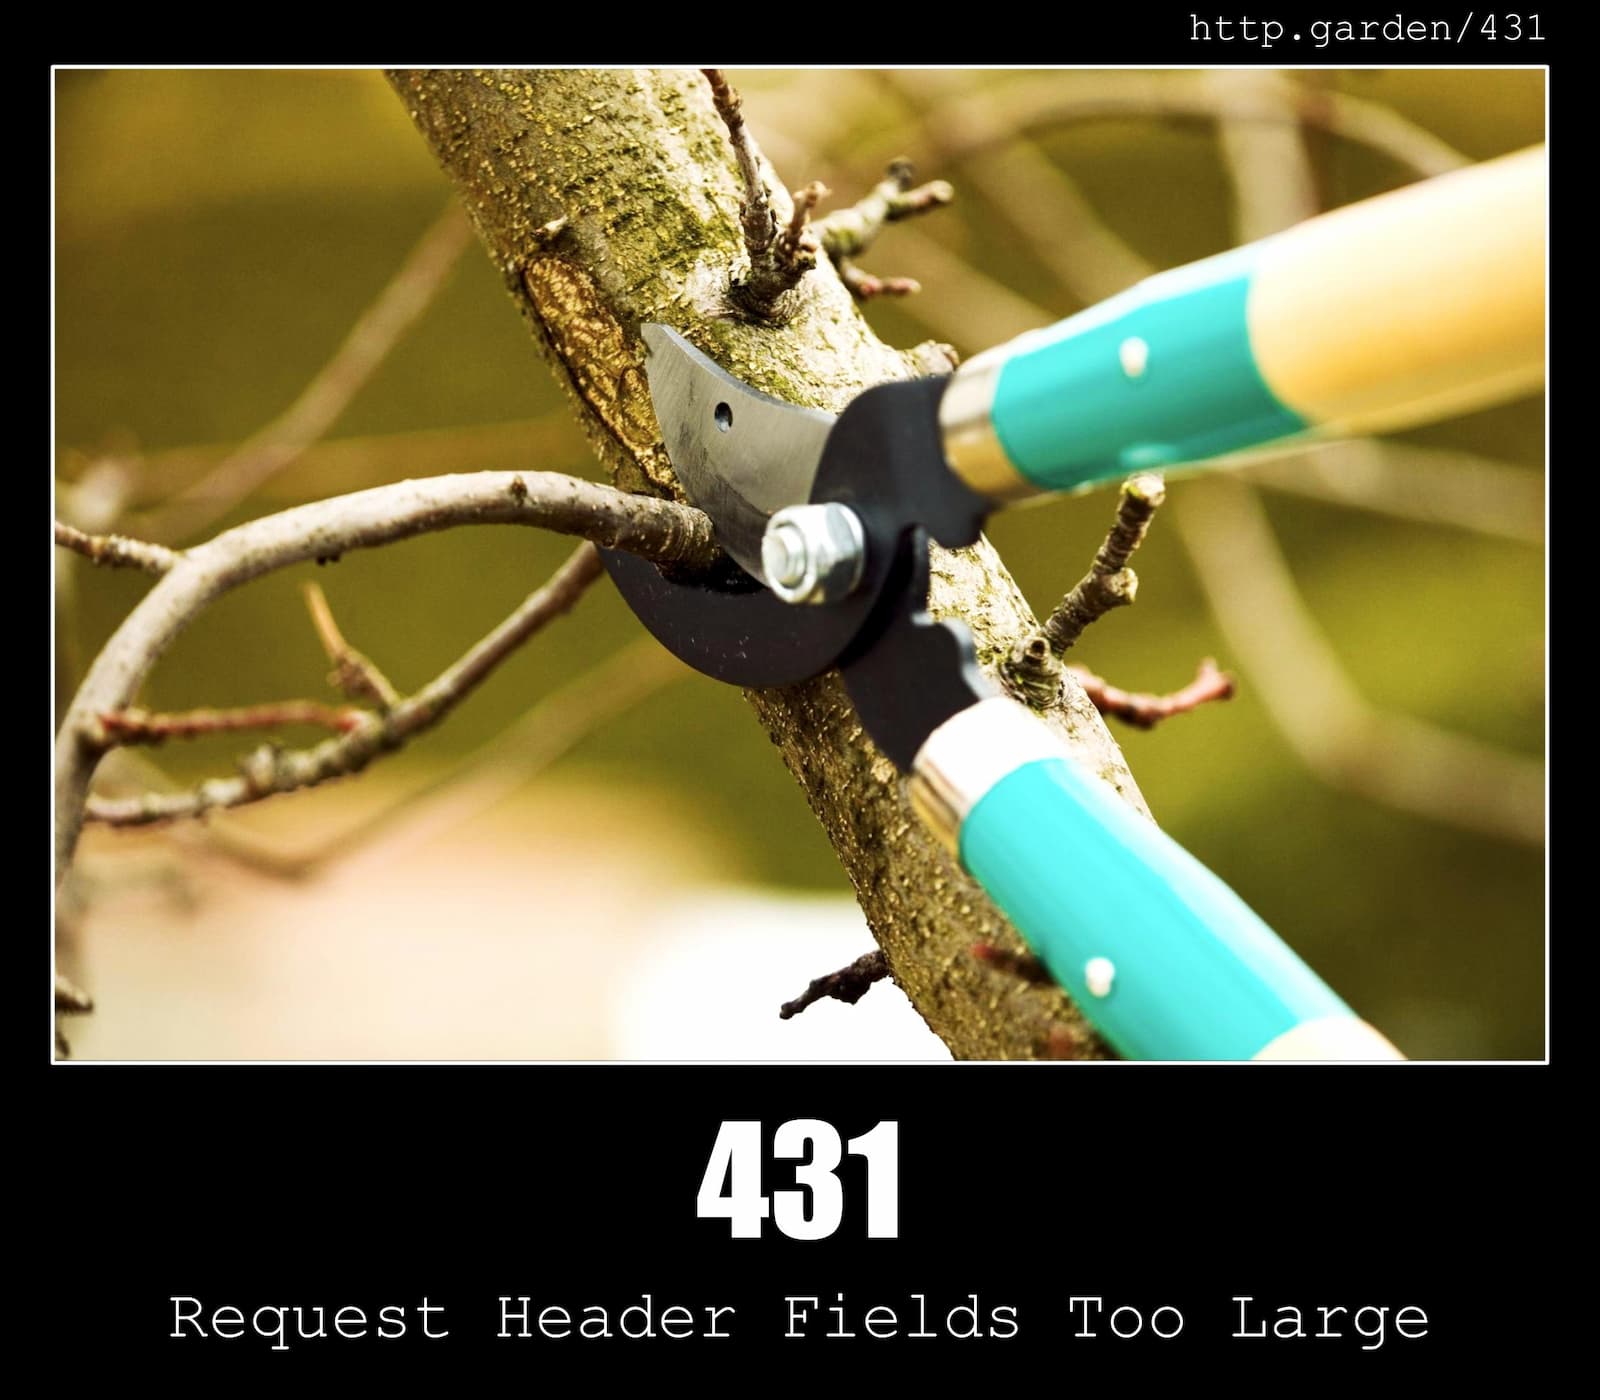 HTTP Status Code 431 Request Header Fields Too Large